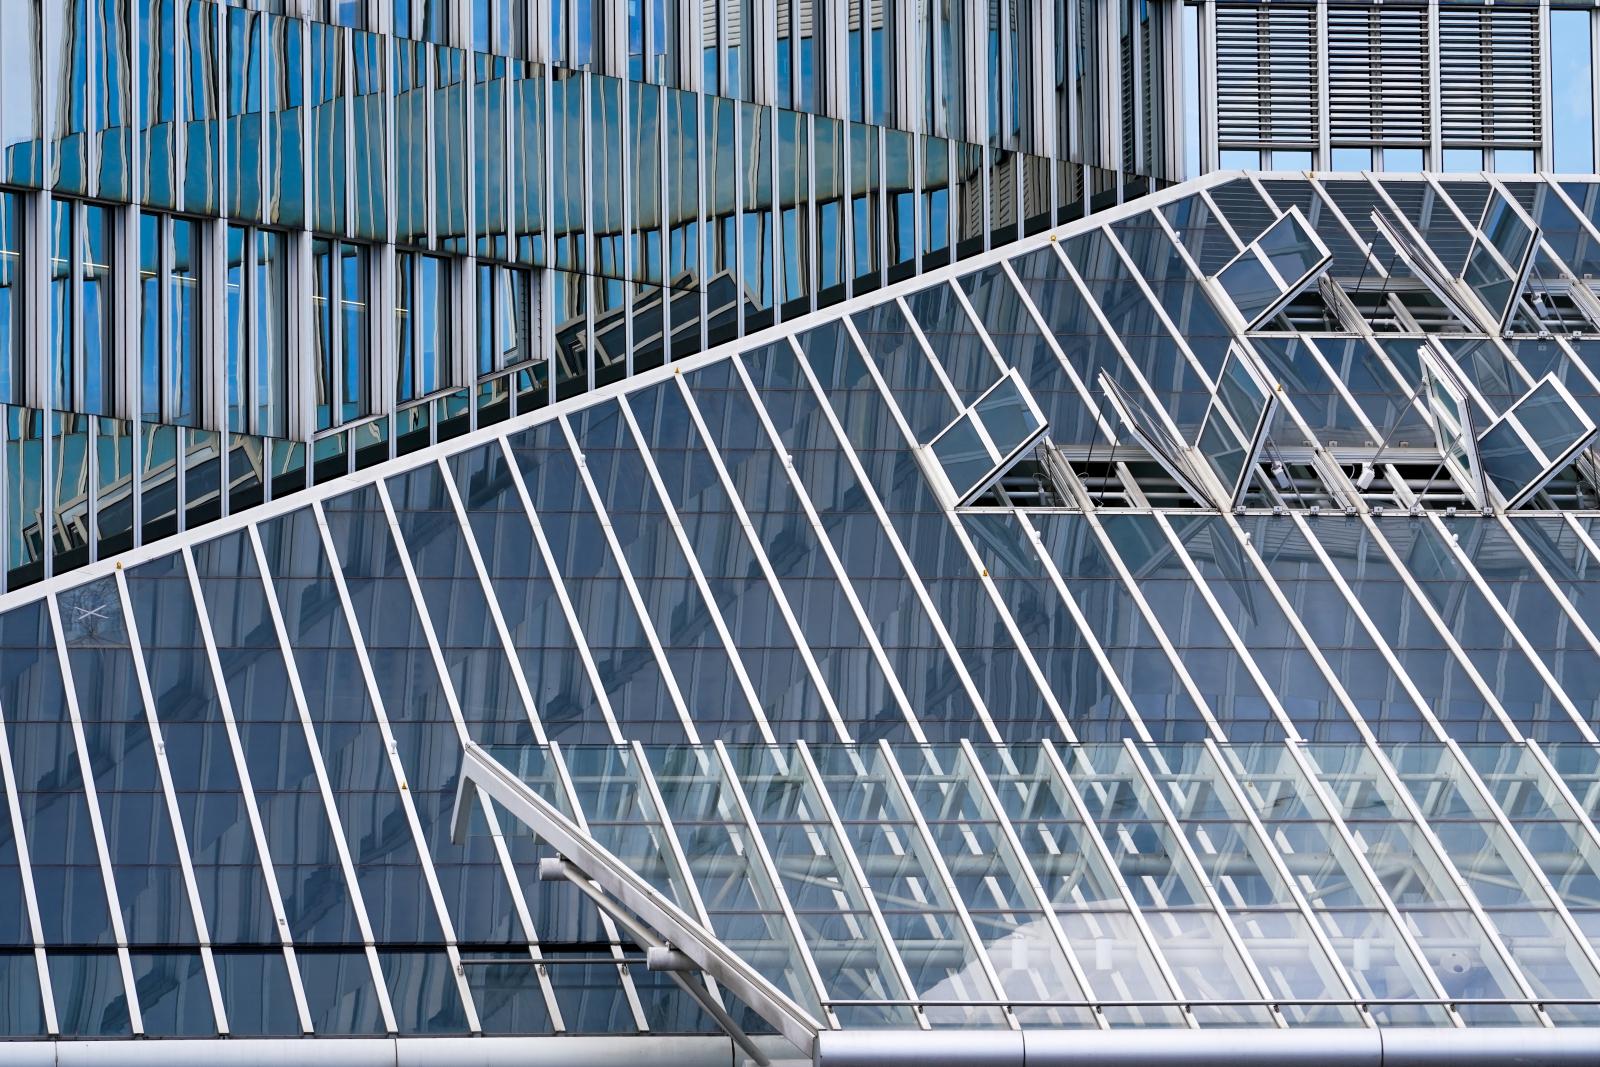 Architectural Symphony in Glass: Interplay of Reflections | Buy this image